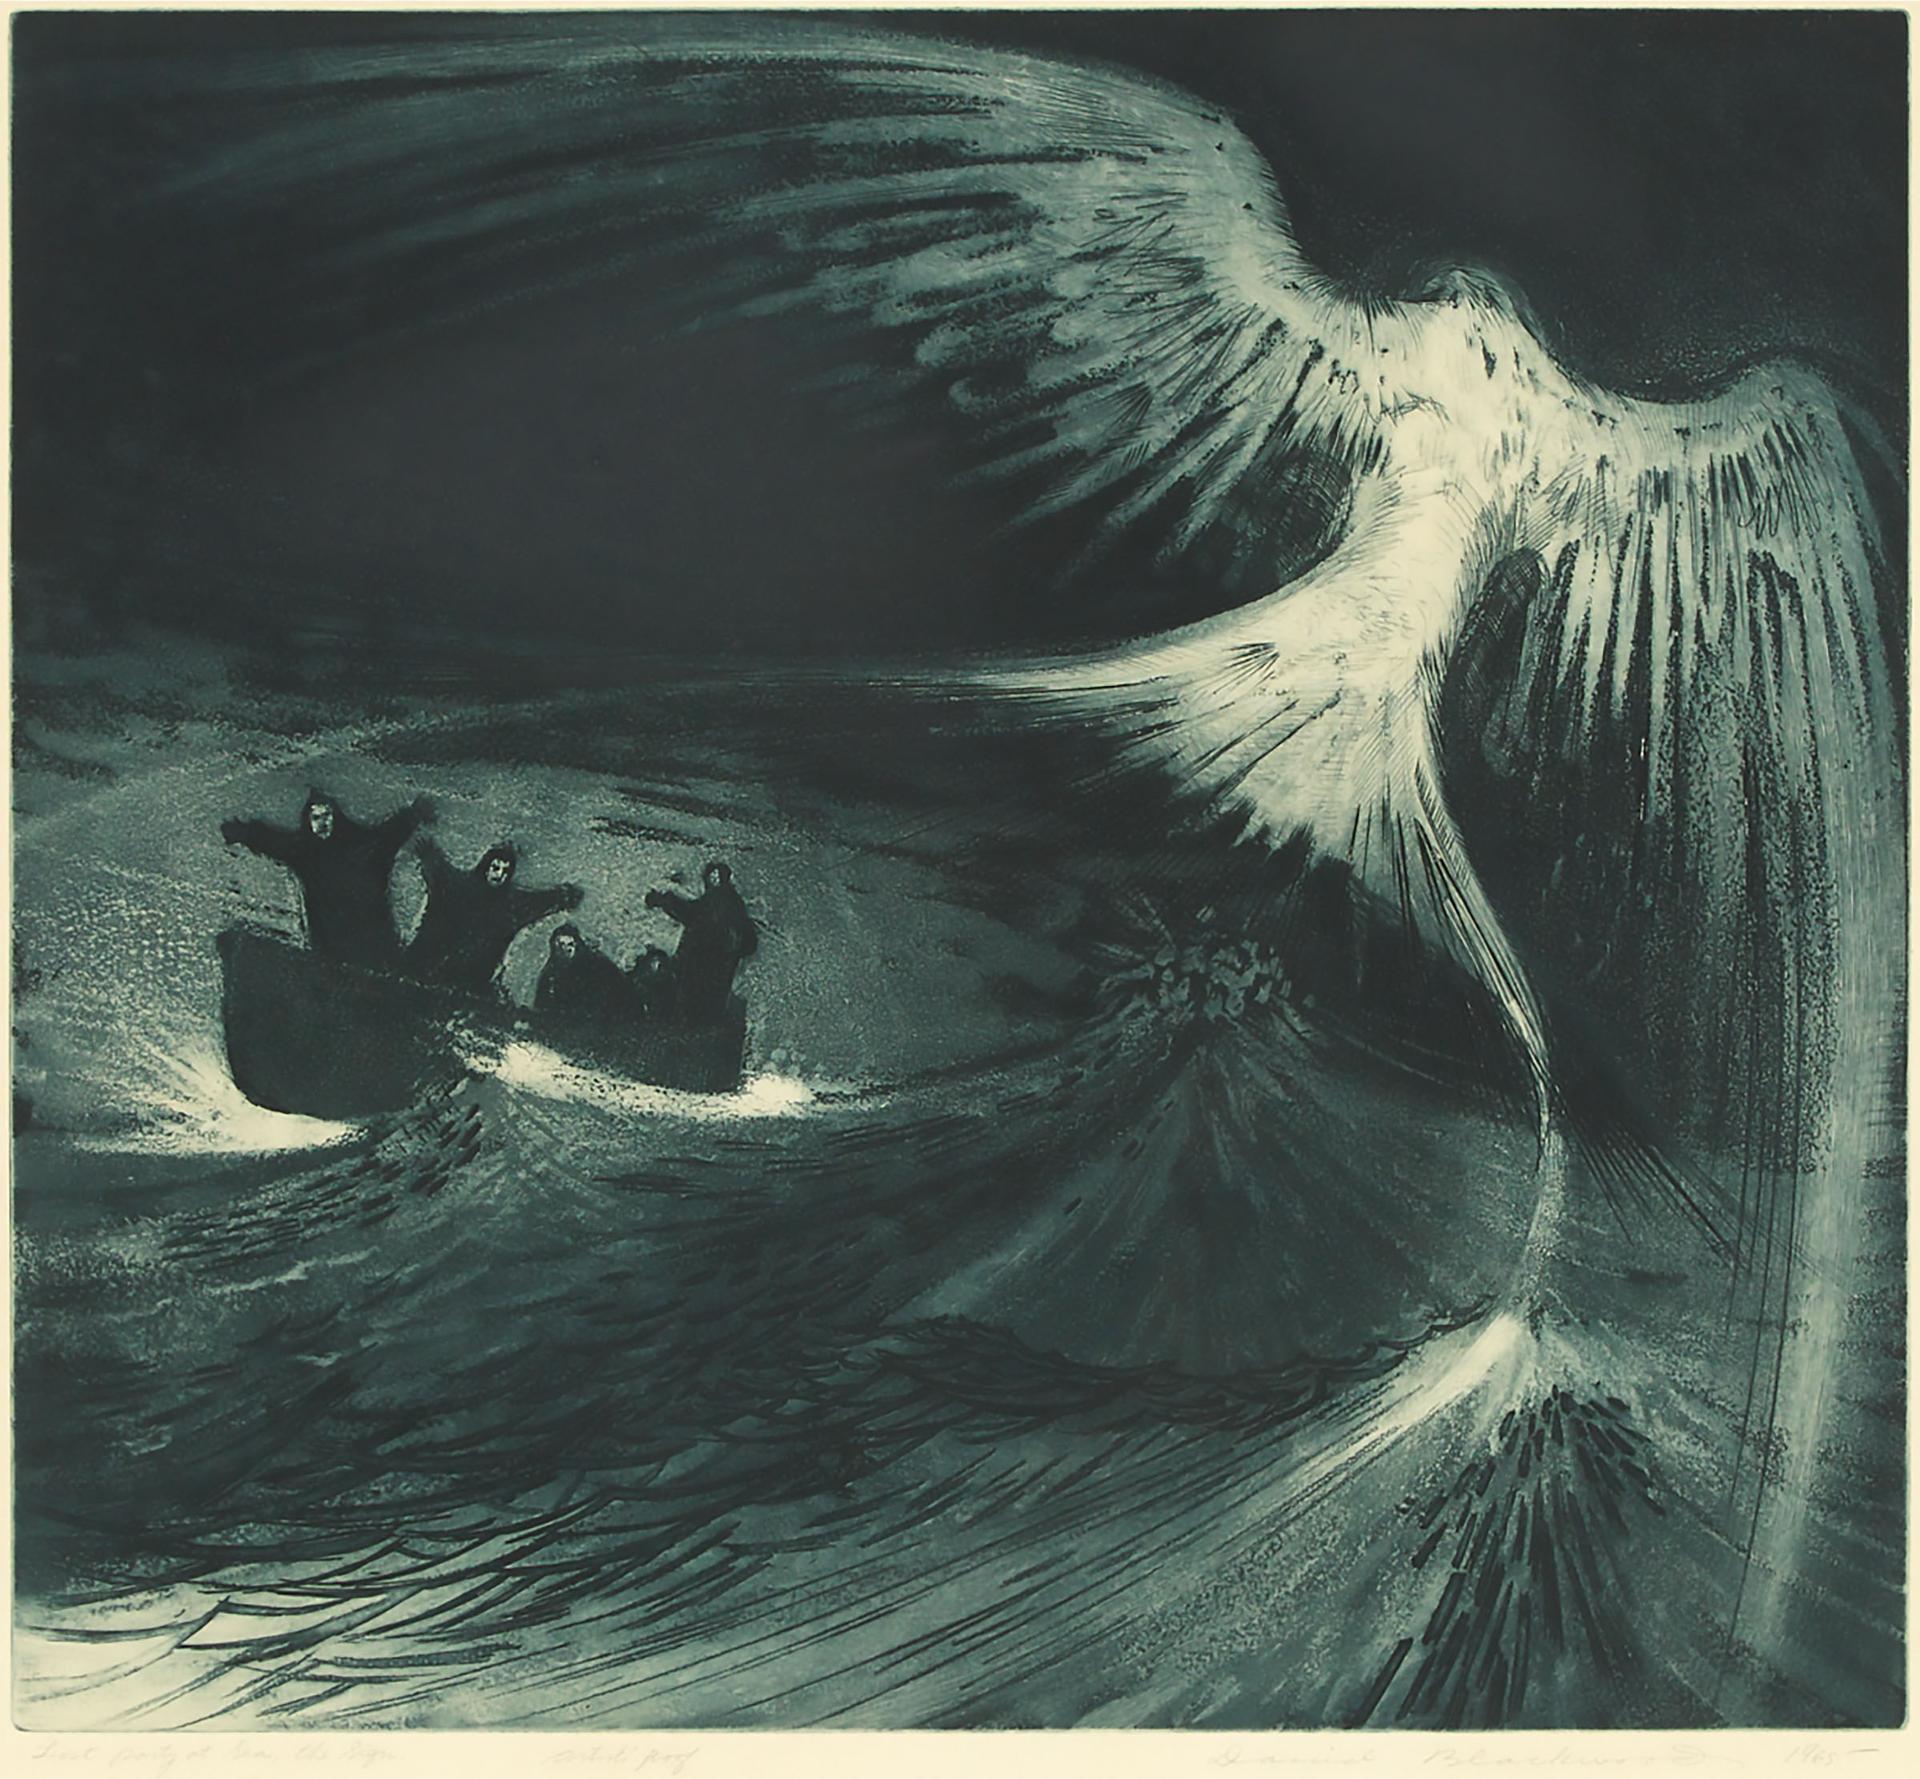 Lost Party At Sea, The Sign, 1965 - etching - printed by David Lloyd ...